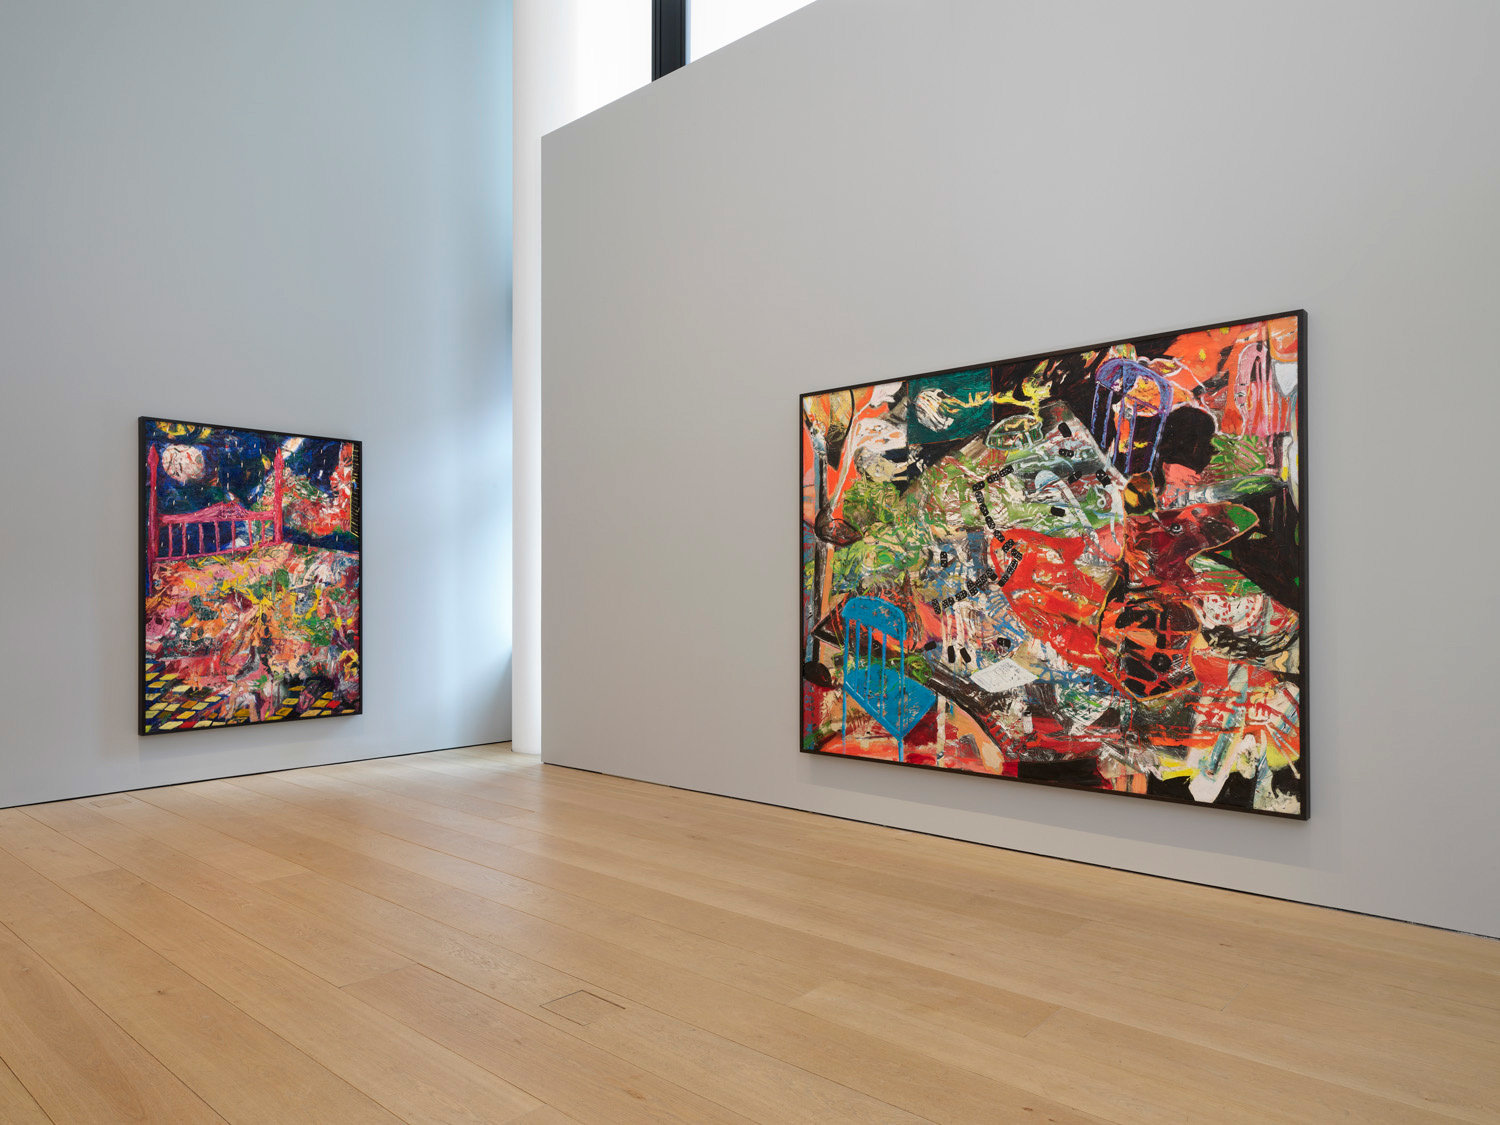 Second installation view of the exhibition Angel Otero: The Fortune of Having Been There at Lehmann Maupin in New York